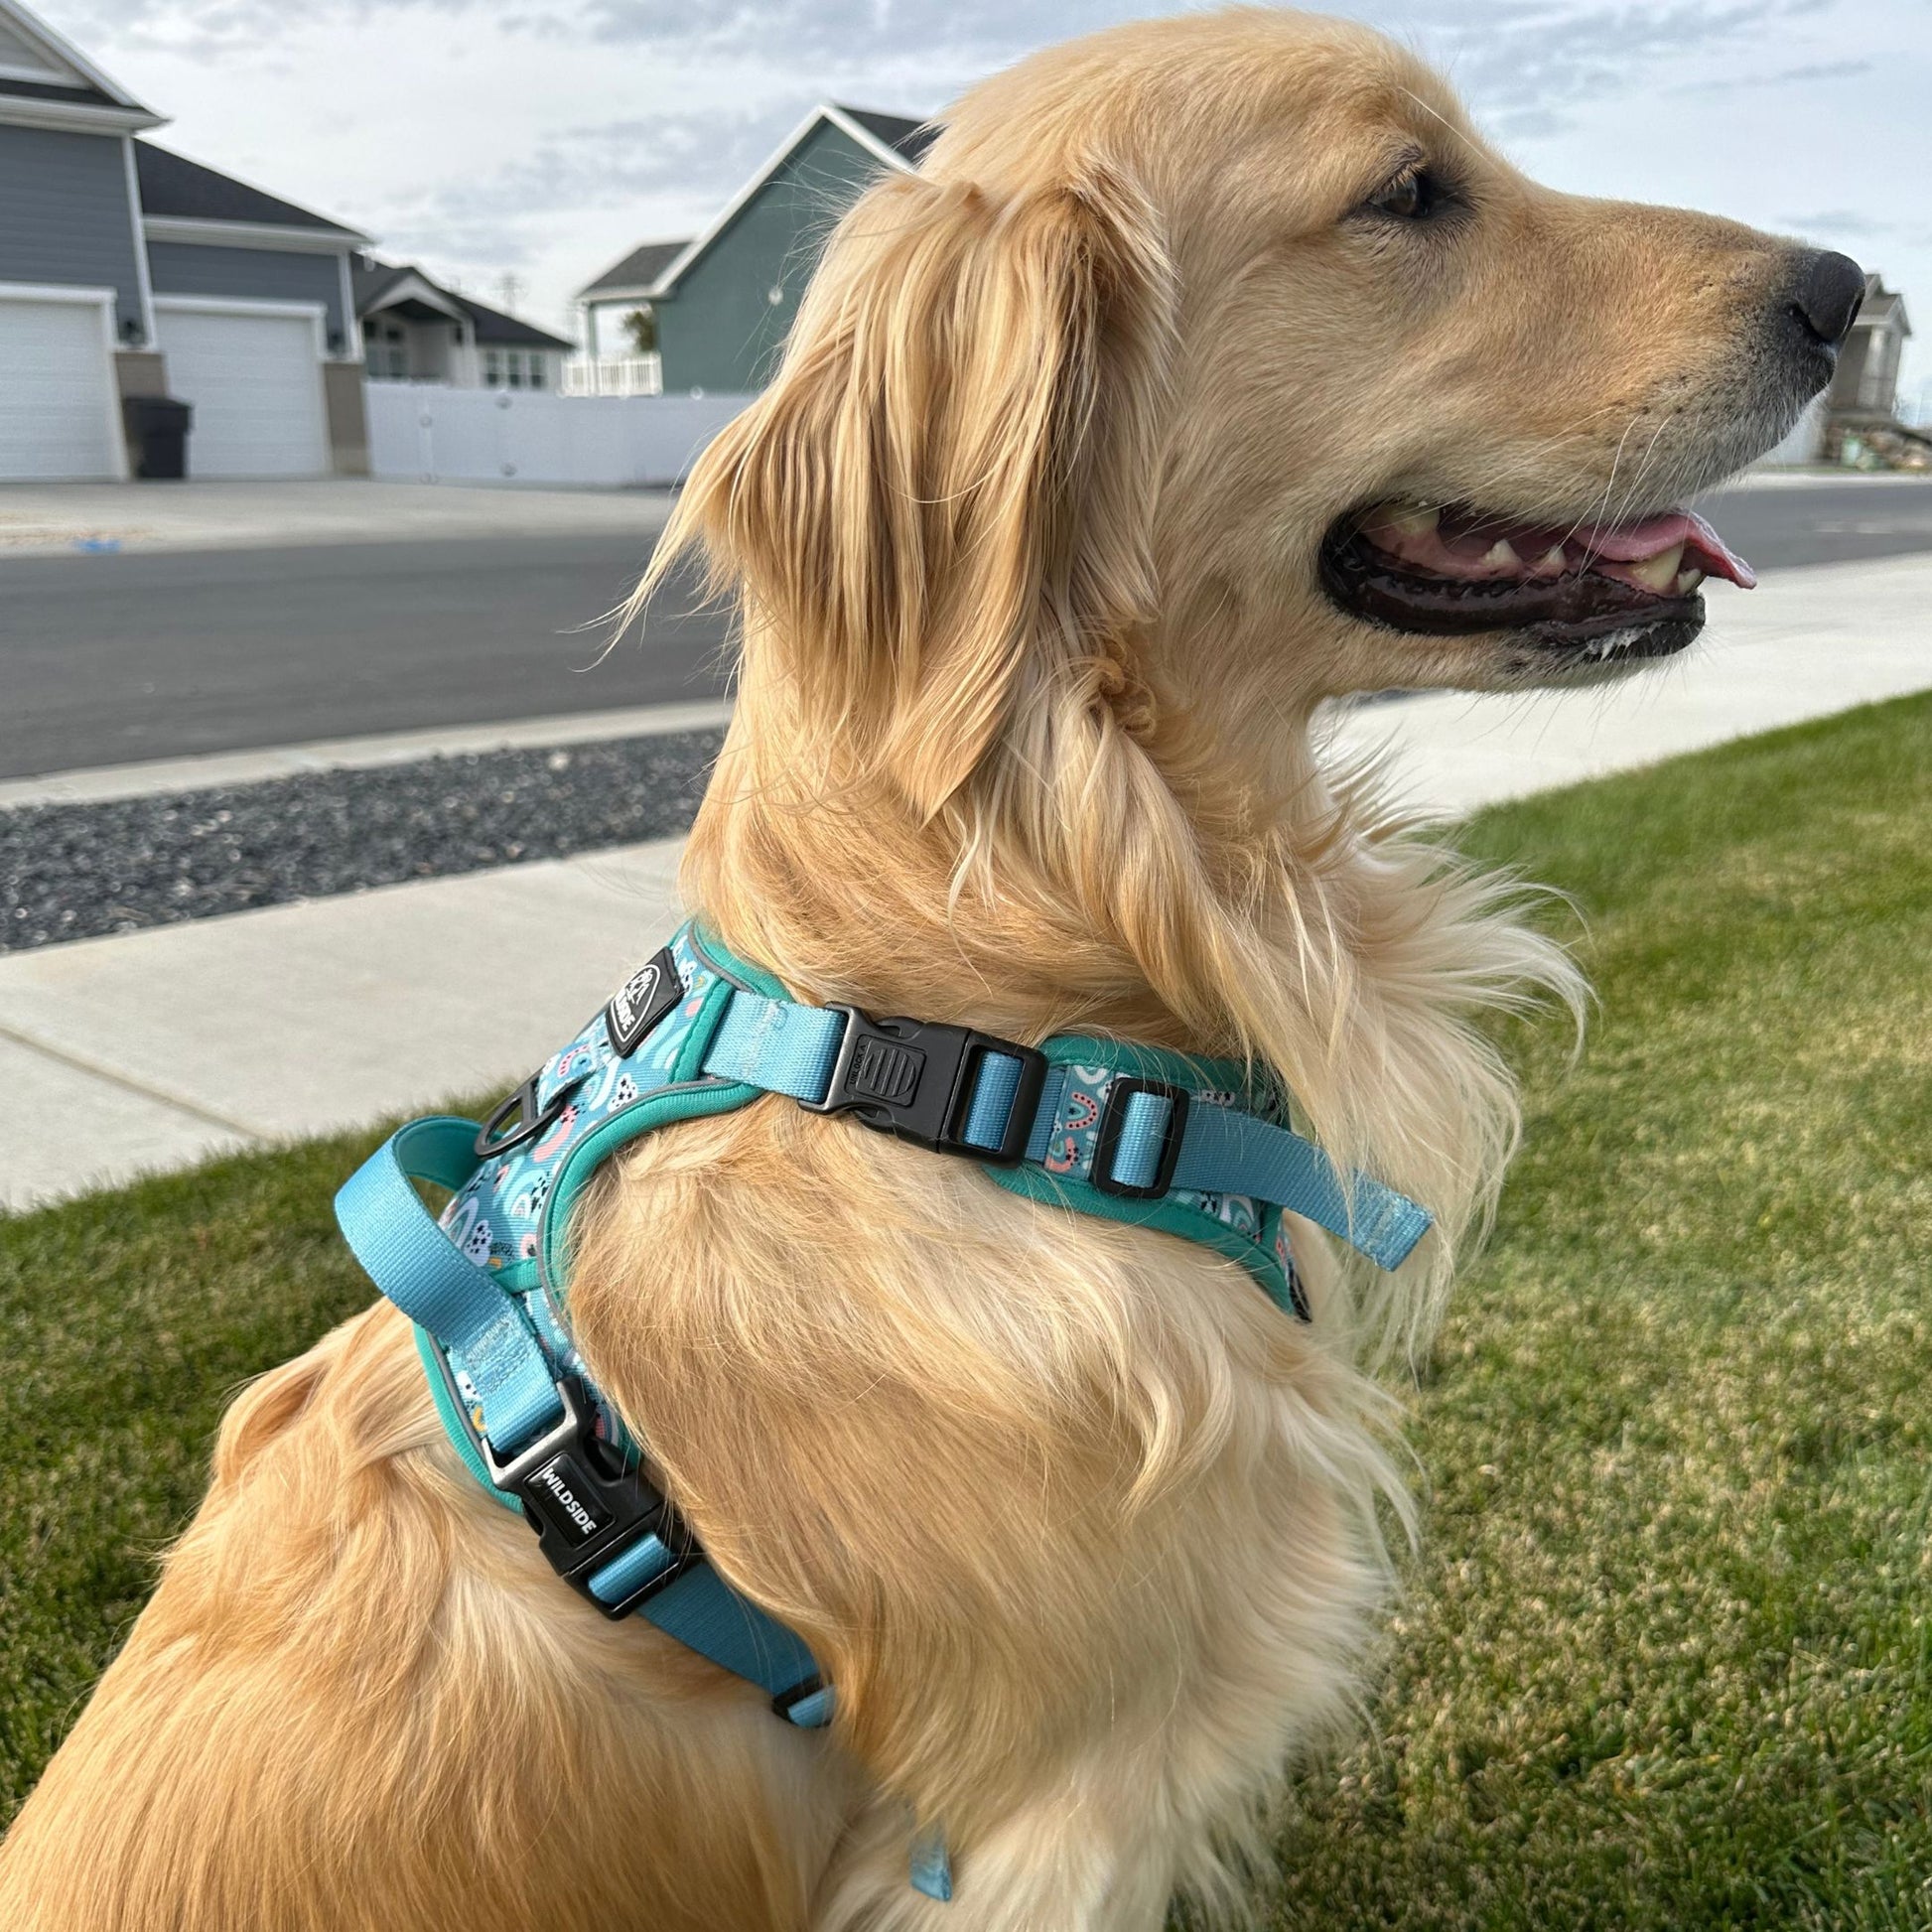 Teal Click N Go Dog Harness with rainbow accents on a Golden Retriever during a walk. front harness vs back harness. cute small dog harness cute dog collars for puppies cute step in dog harness cute dog harness set dog harness for big dogs cute dog harness for big dogs  dog harness training front harness vs back harness